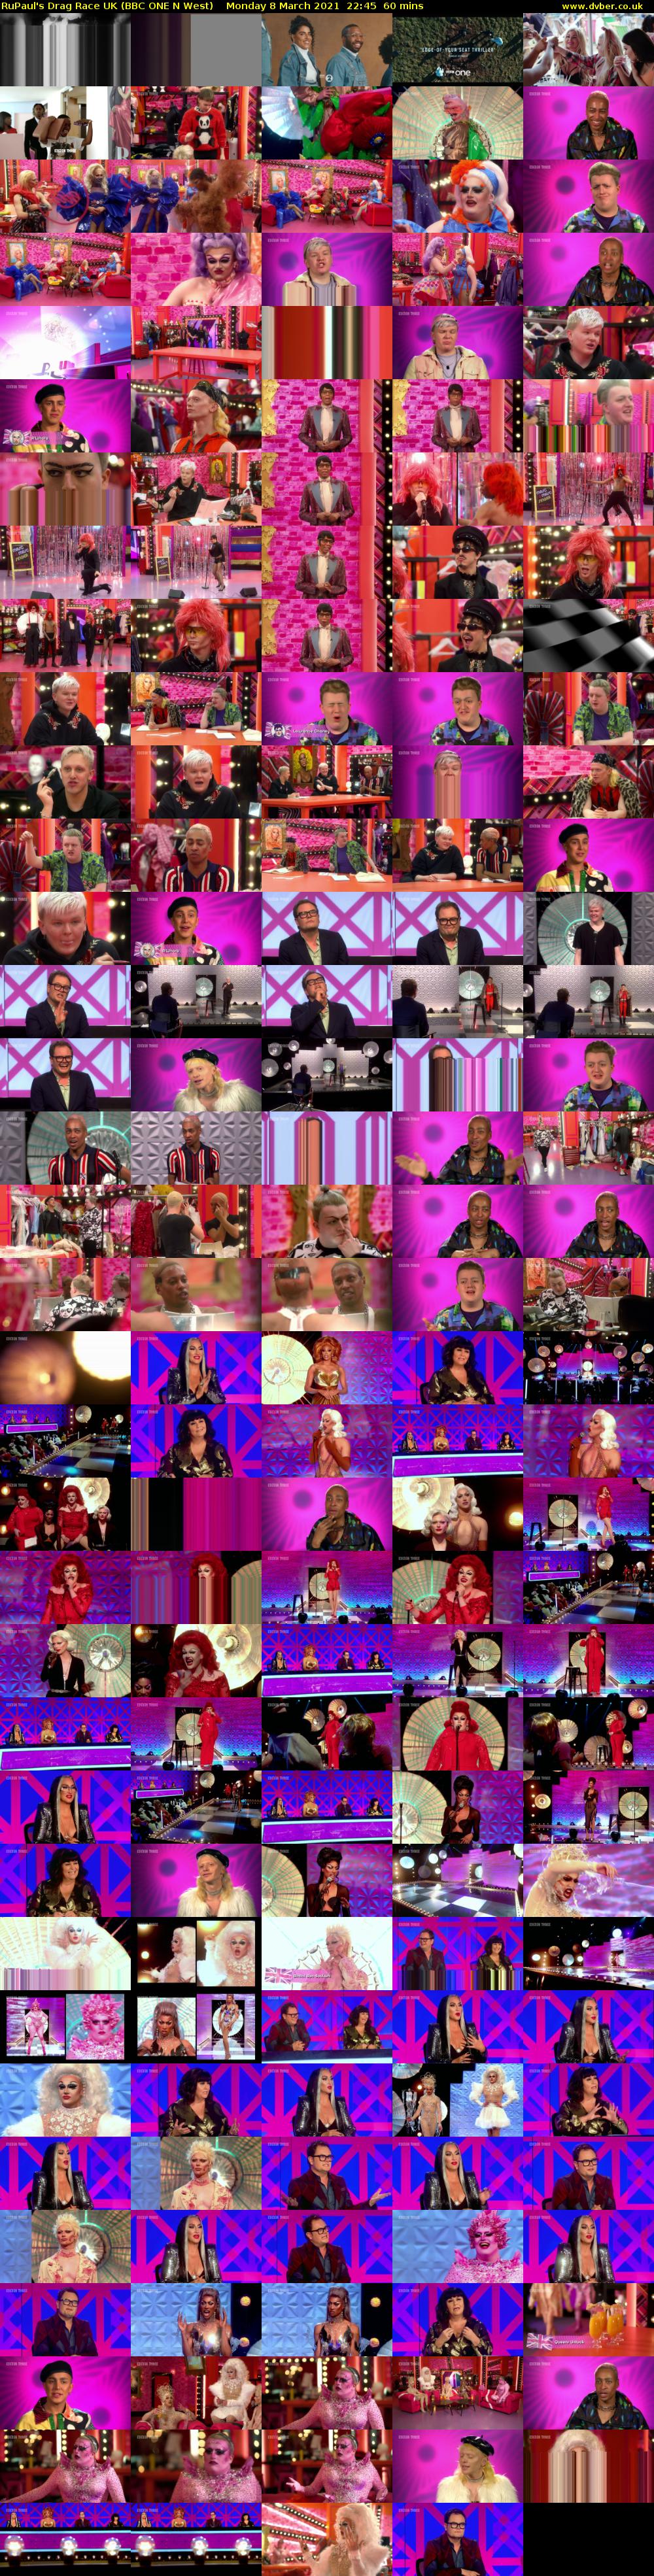 RuPaul's Drag Race UK (BBC ONE N West) Monday 8 March 2021 22:45 - 23:45